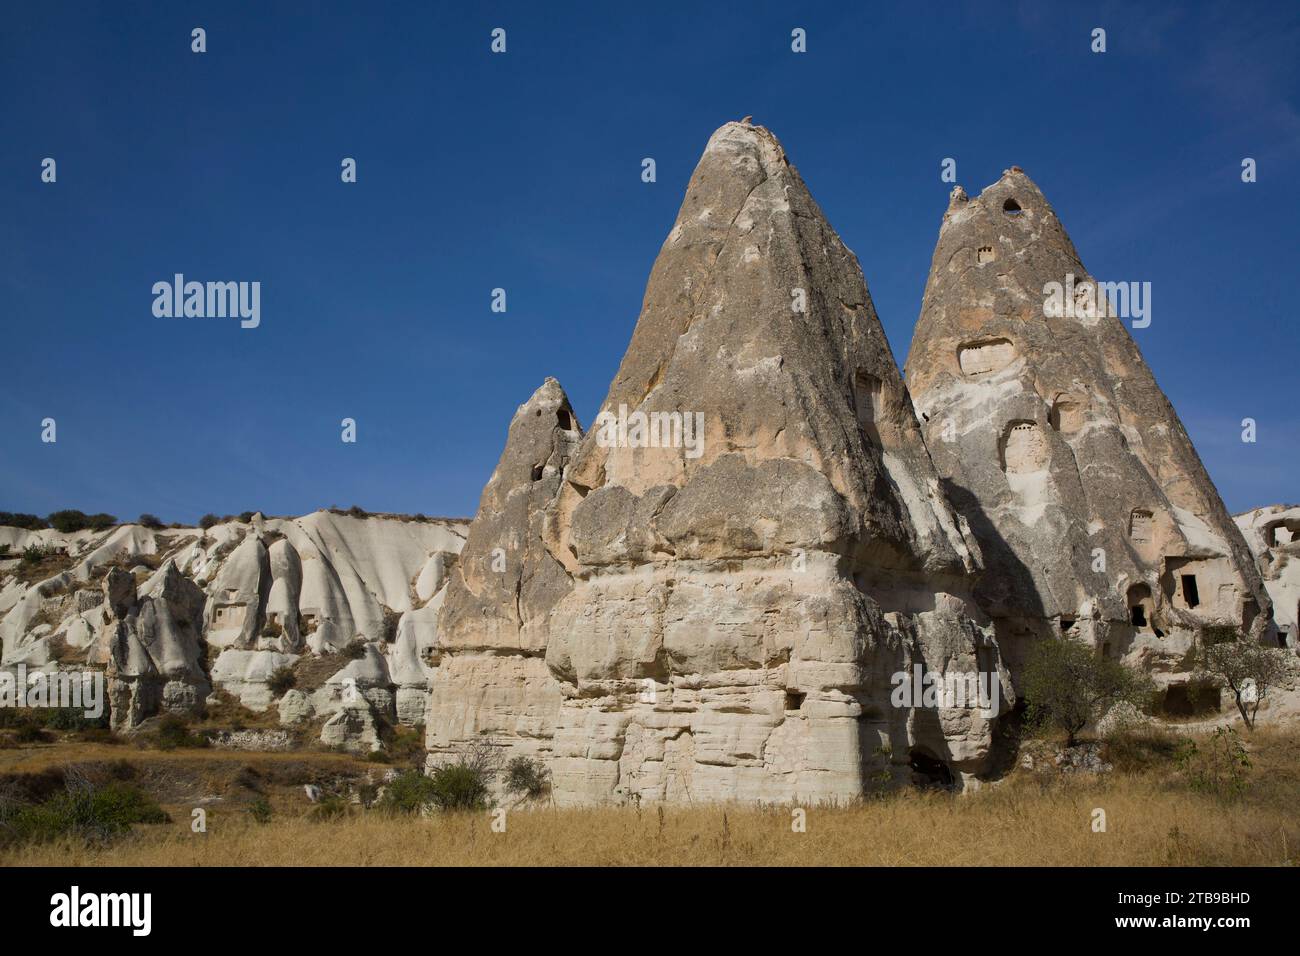 Cave Houses carved out of rock formations against a bright blue sky near the town of Goreme in Pigeon Valley, Cappadocia Region Stock Photo